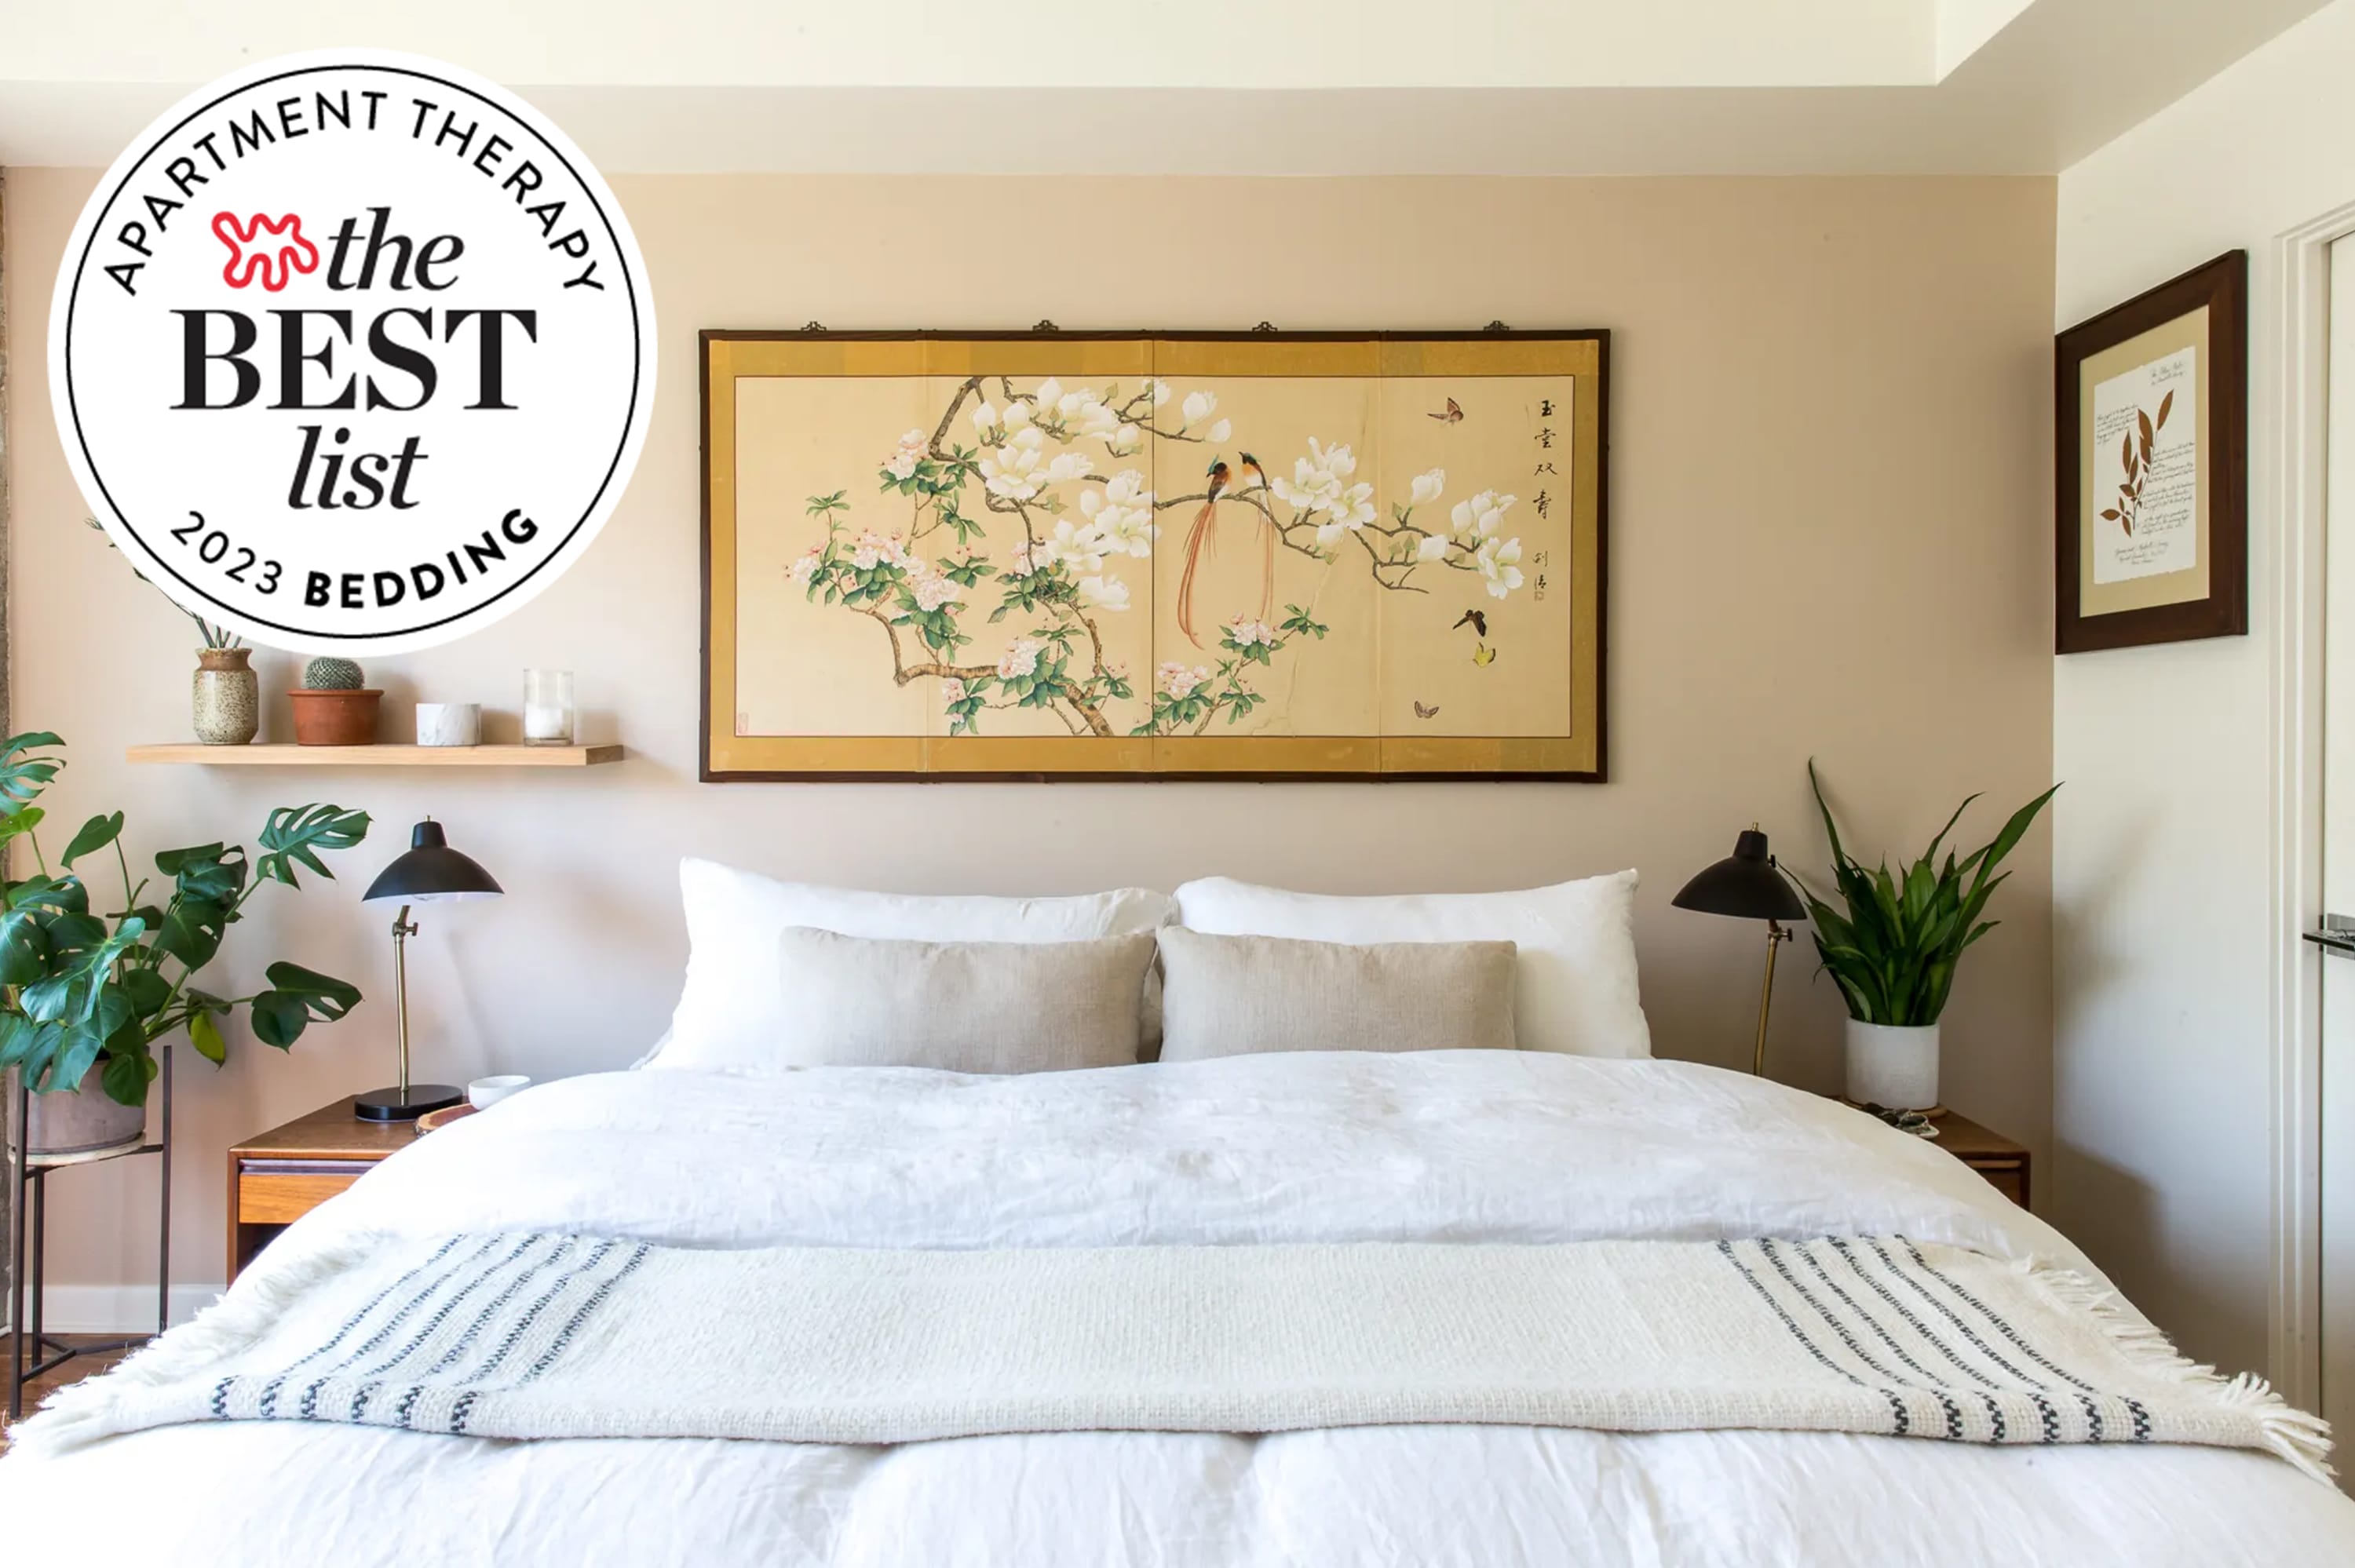 How to Style a King-Size Bed for Chic, Ultra-Cozy Results